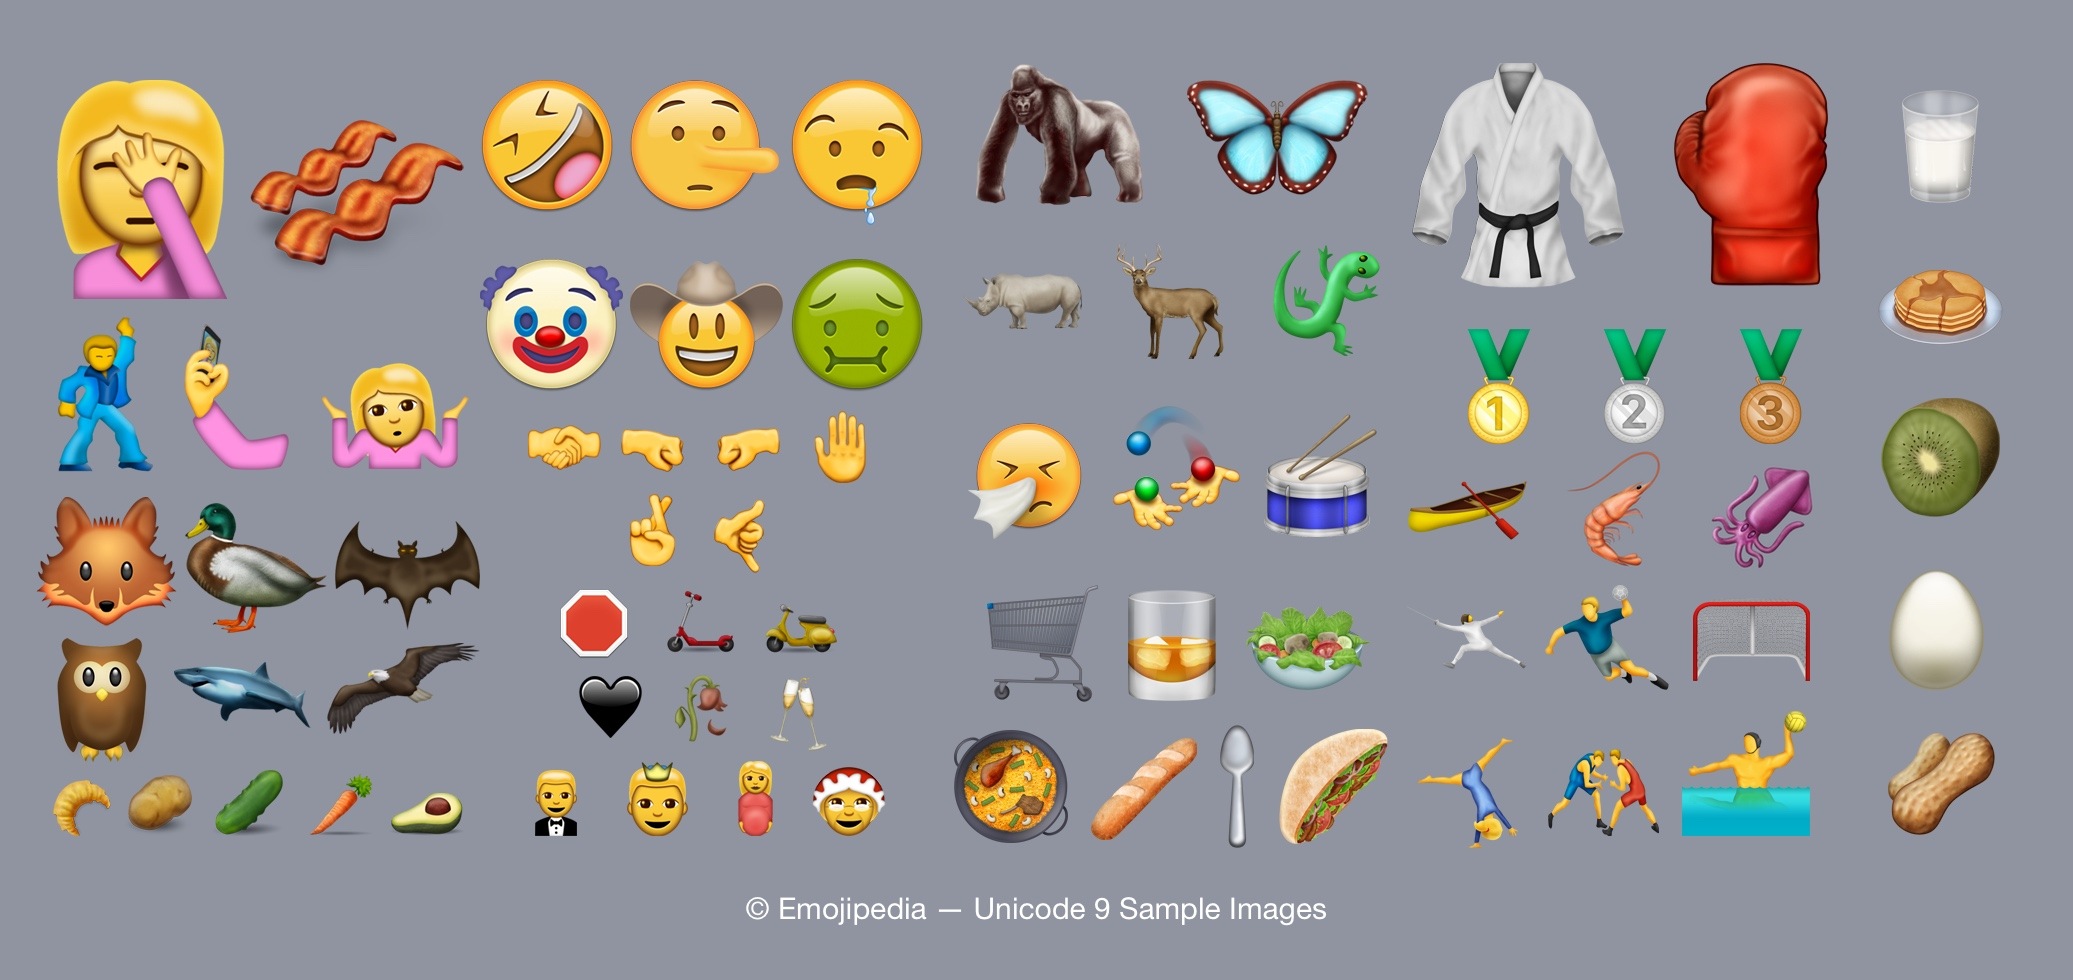 bacon-clinking-glasses-and-72-other-emojis-coming-soon